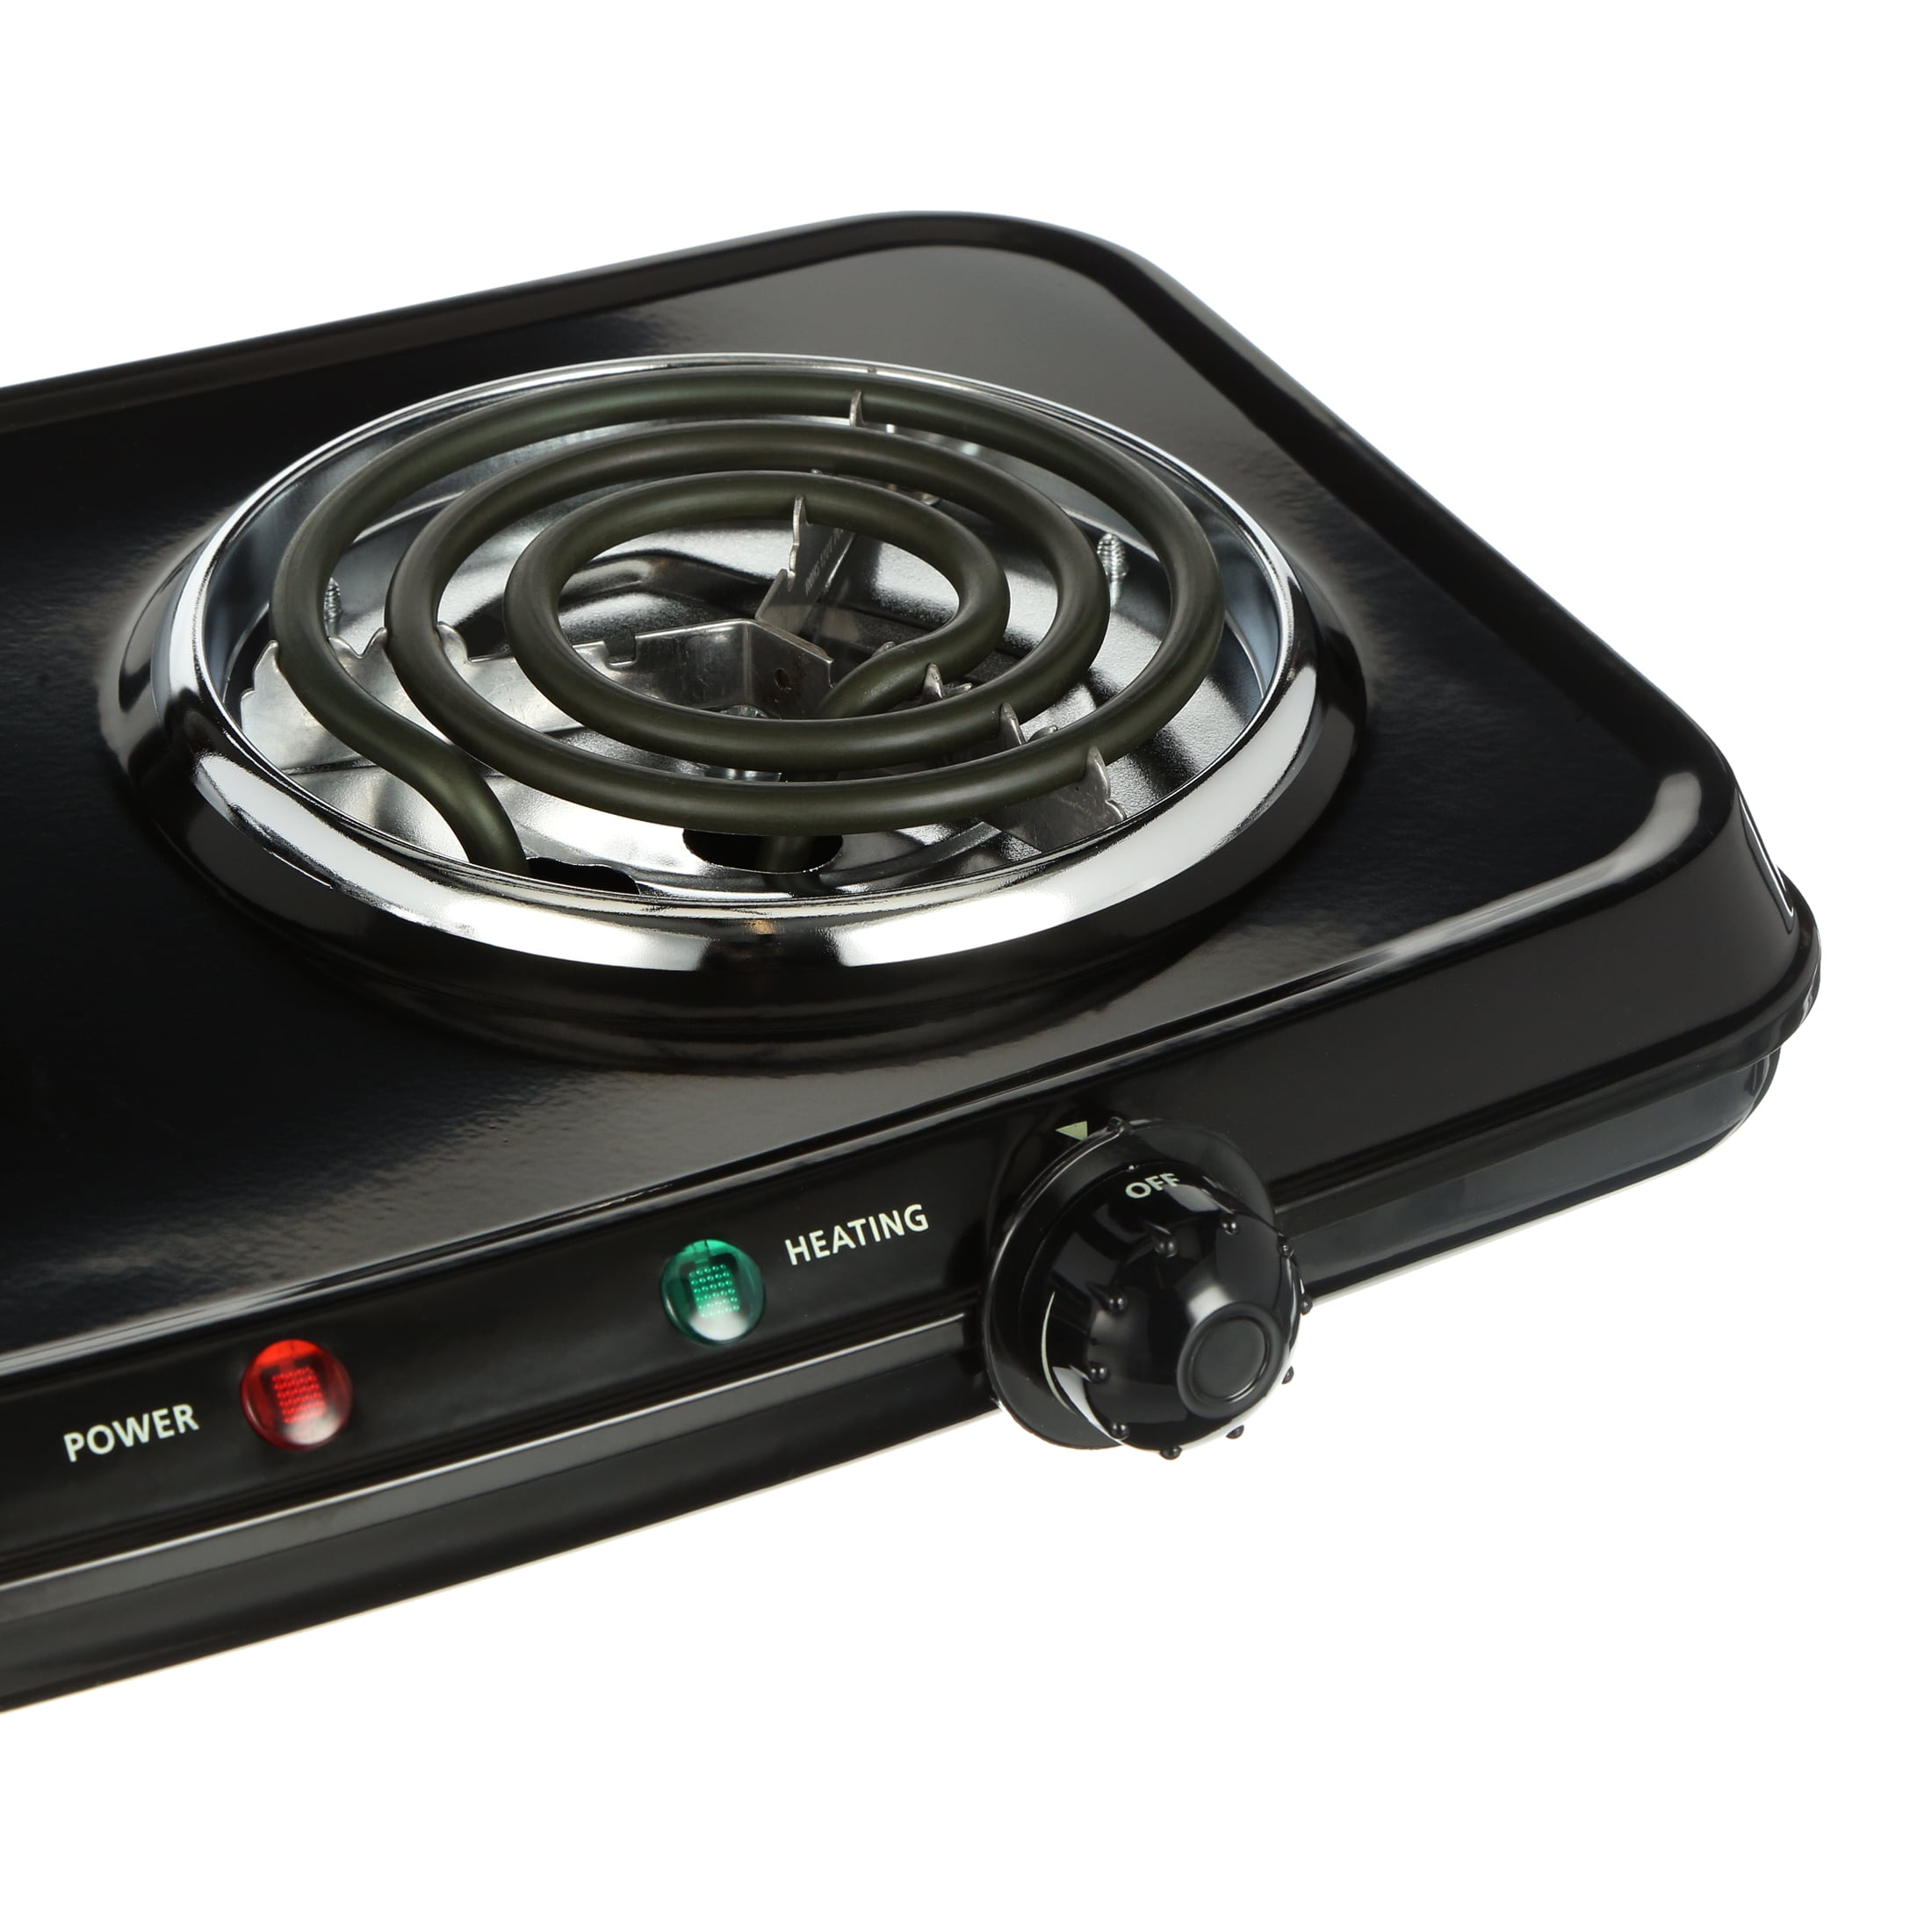 YONGSTYLE Electric Double Burner Hot Plate for Cooking, 1800W Portable  Electric Stove, 6 Speed Adjustable Thermostats, Stainless Steel Hot Plate  for Kitchen, Dorm and Camping